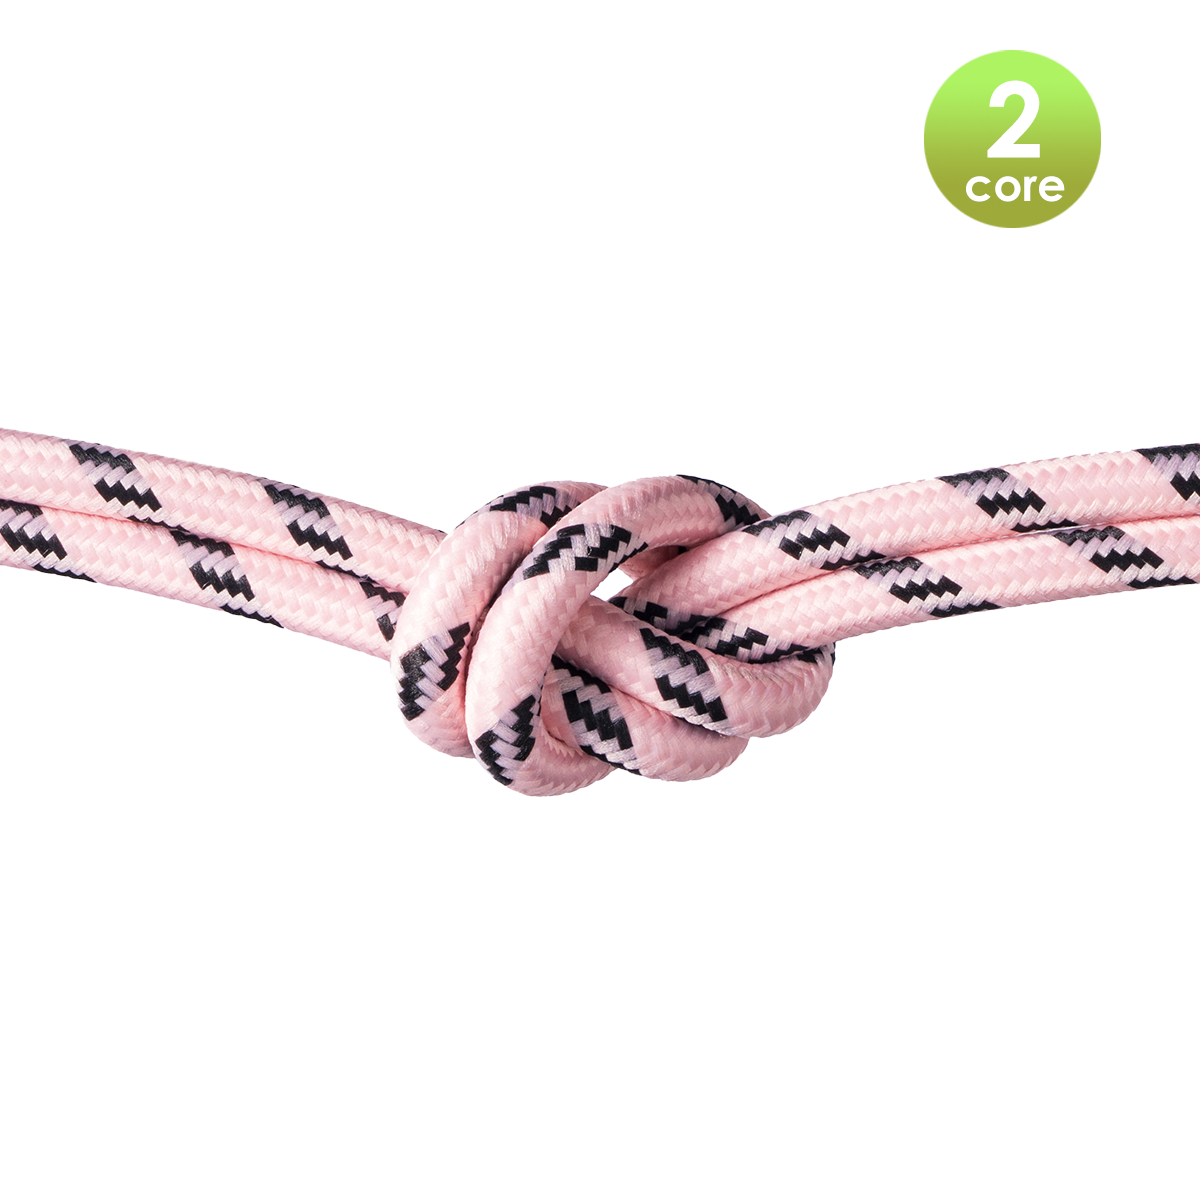 Tangla lighting - TLCB03002C - Fabric cable 2 core - in pink and black dot